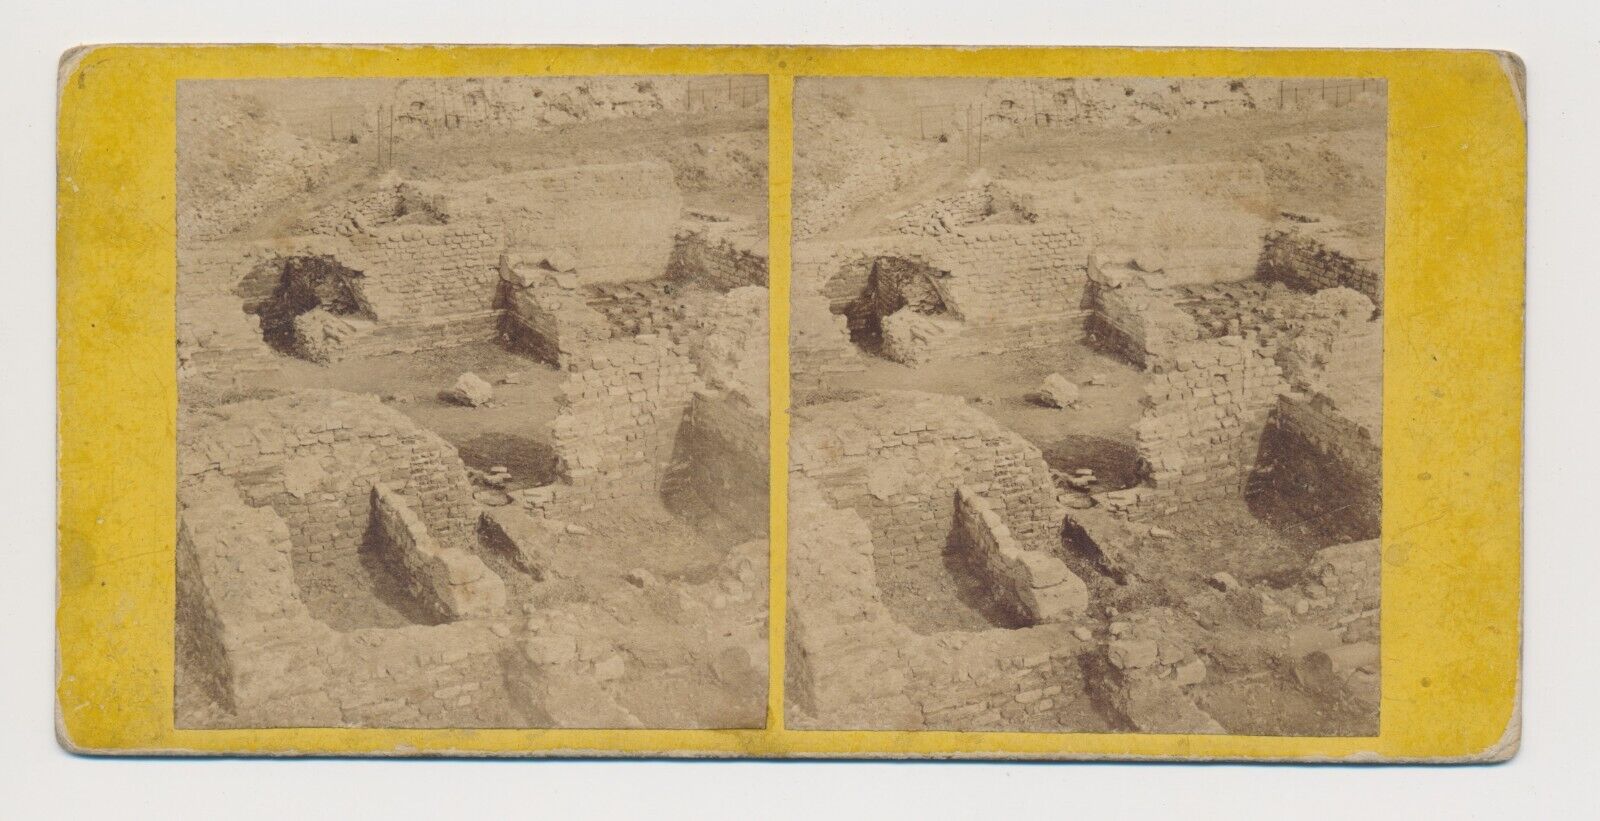 Stereoview c1860s Wroxeter Excavations in Salop Roman Ruins Shropshire England